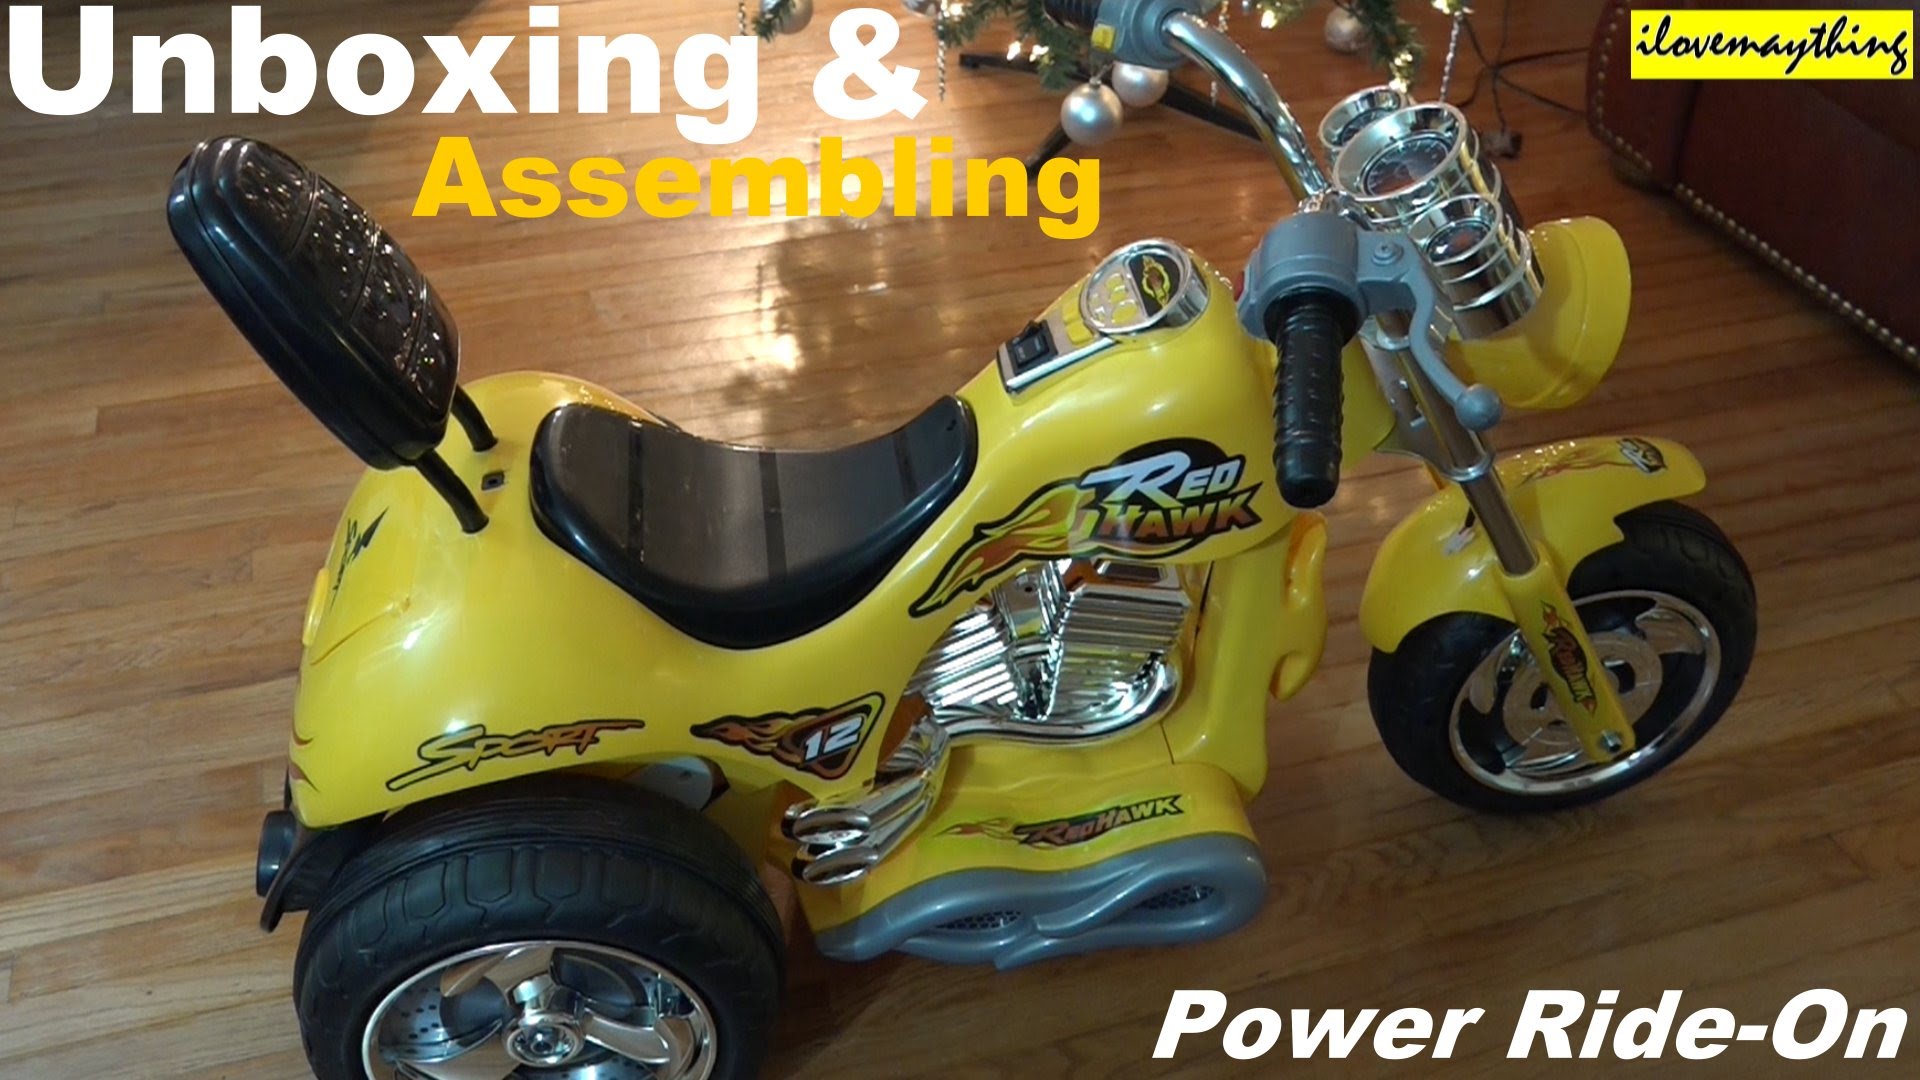 Awesome Toys: Power Ride-On Motorcycle for Kids Unboxing and ...